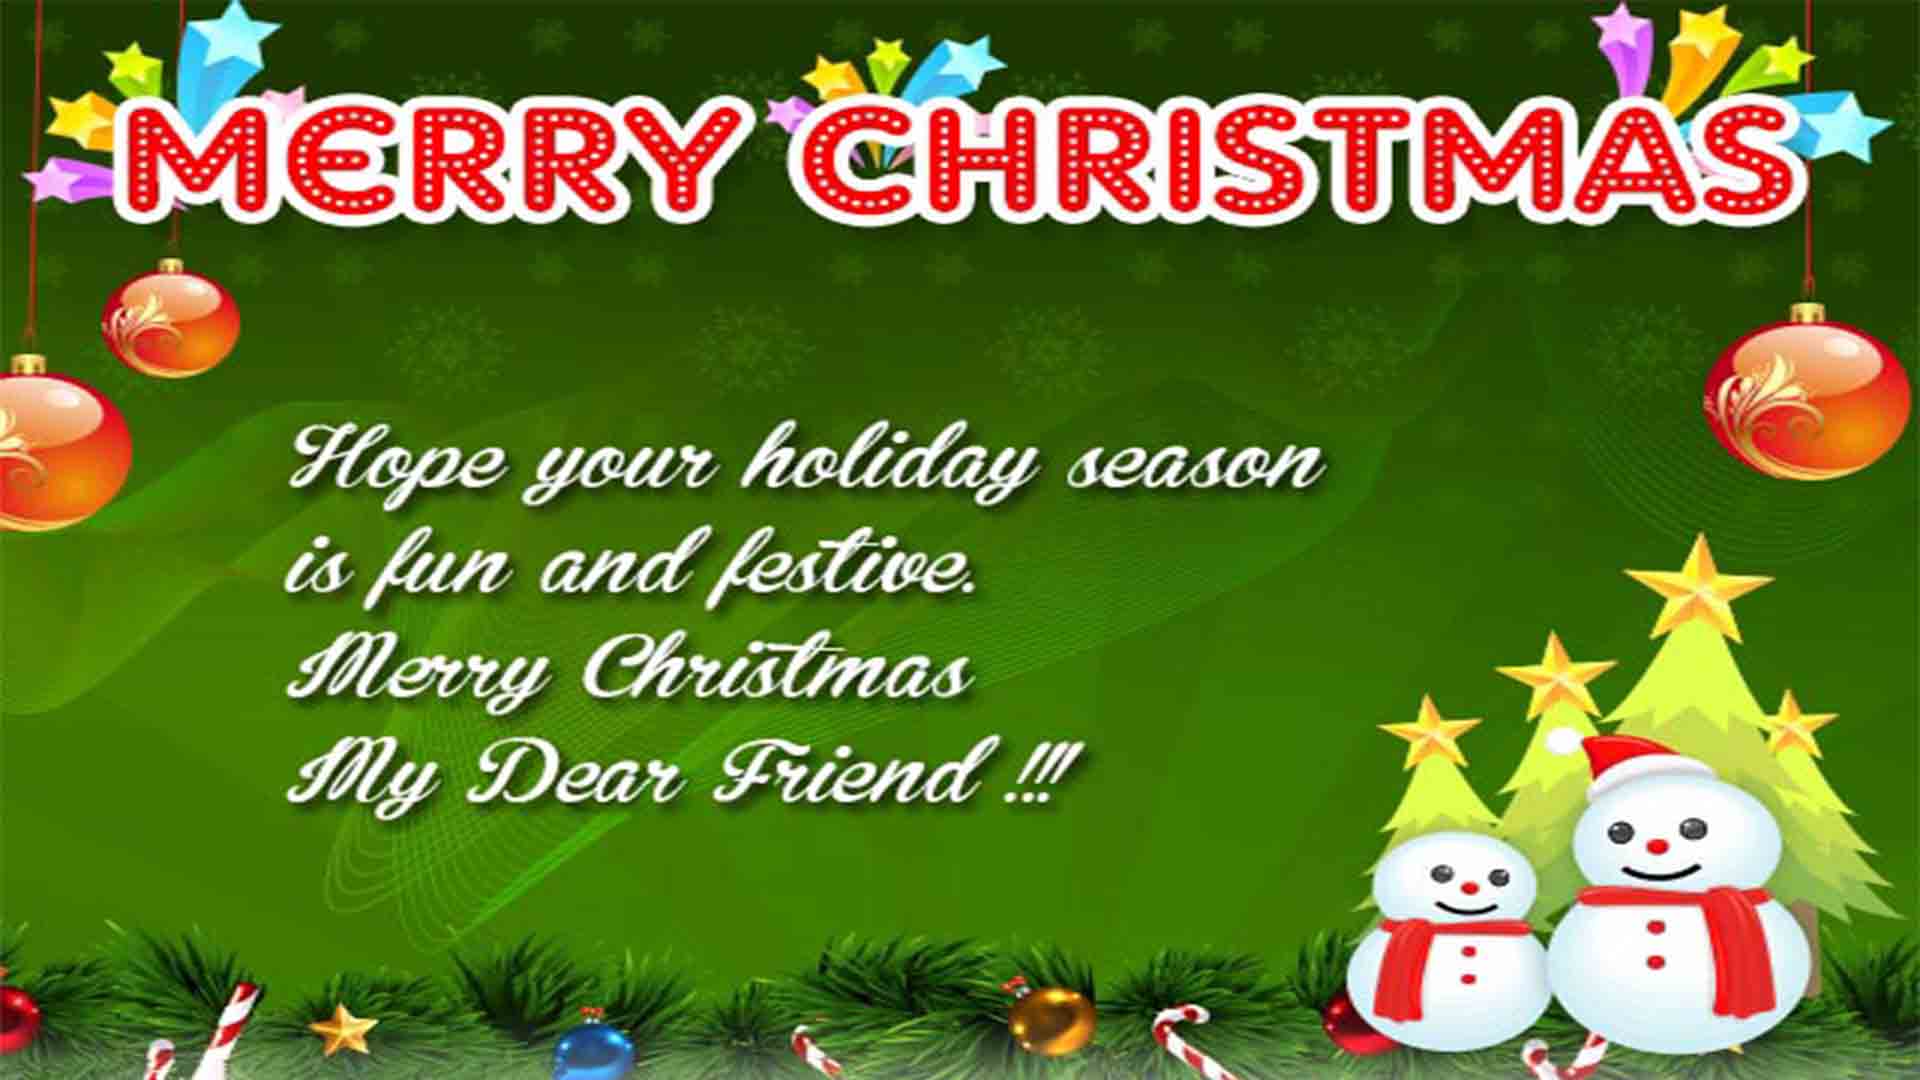 merry christmas greeting cards image